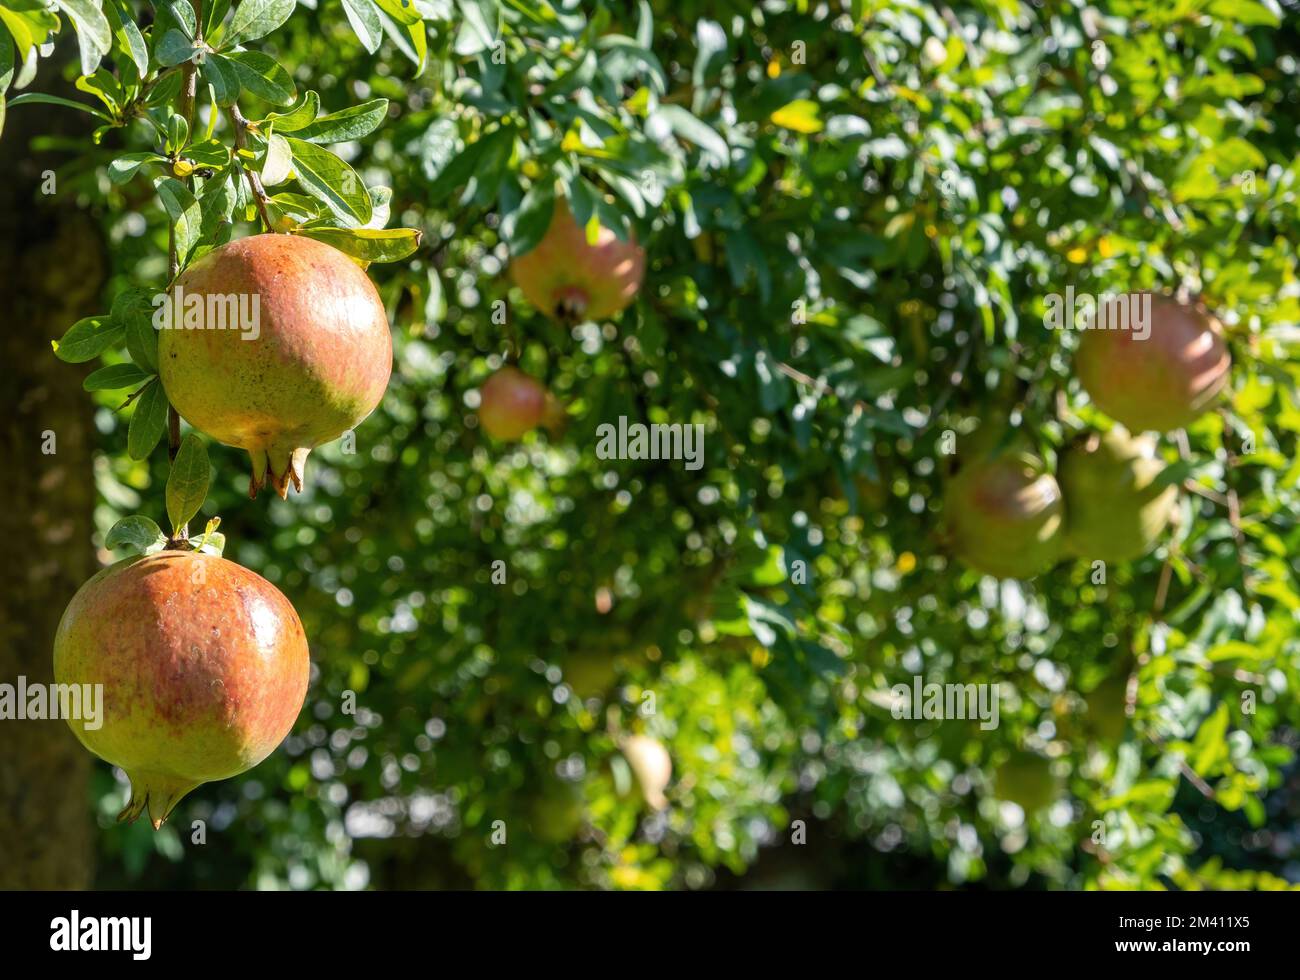 Pomegranate tree and ripe fruits hanging, harvest season. Punica granatum foliage and fruit with red juicy sweet seed Stock Photo